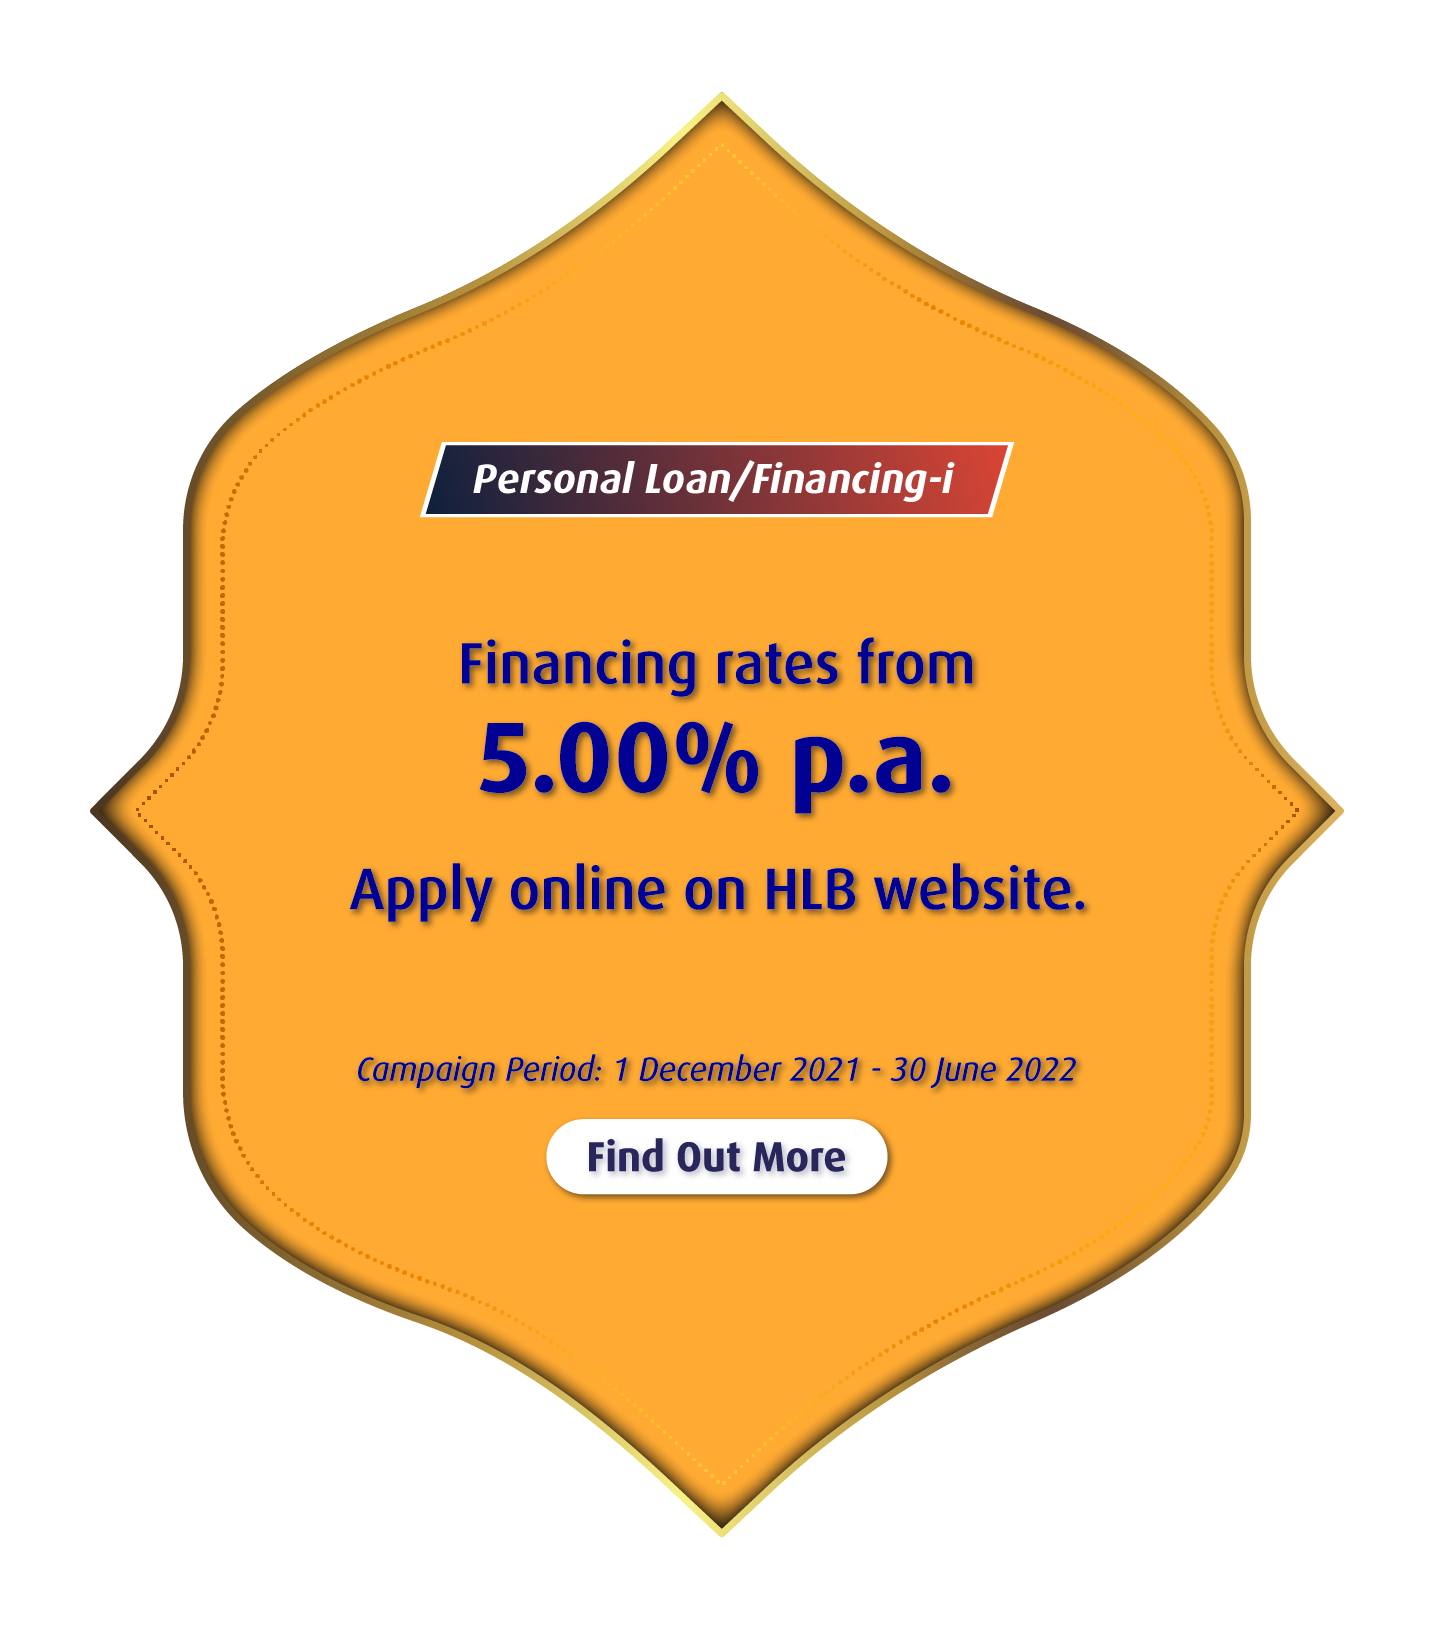 Financing rates from 5.00% p.a.